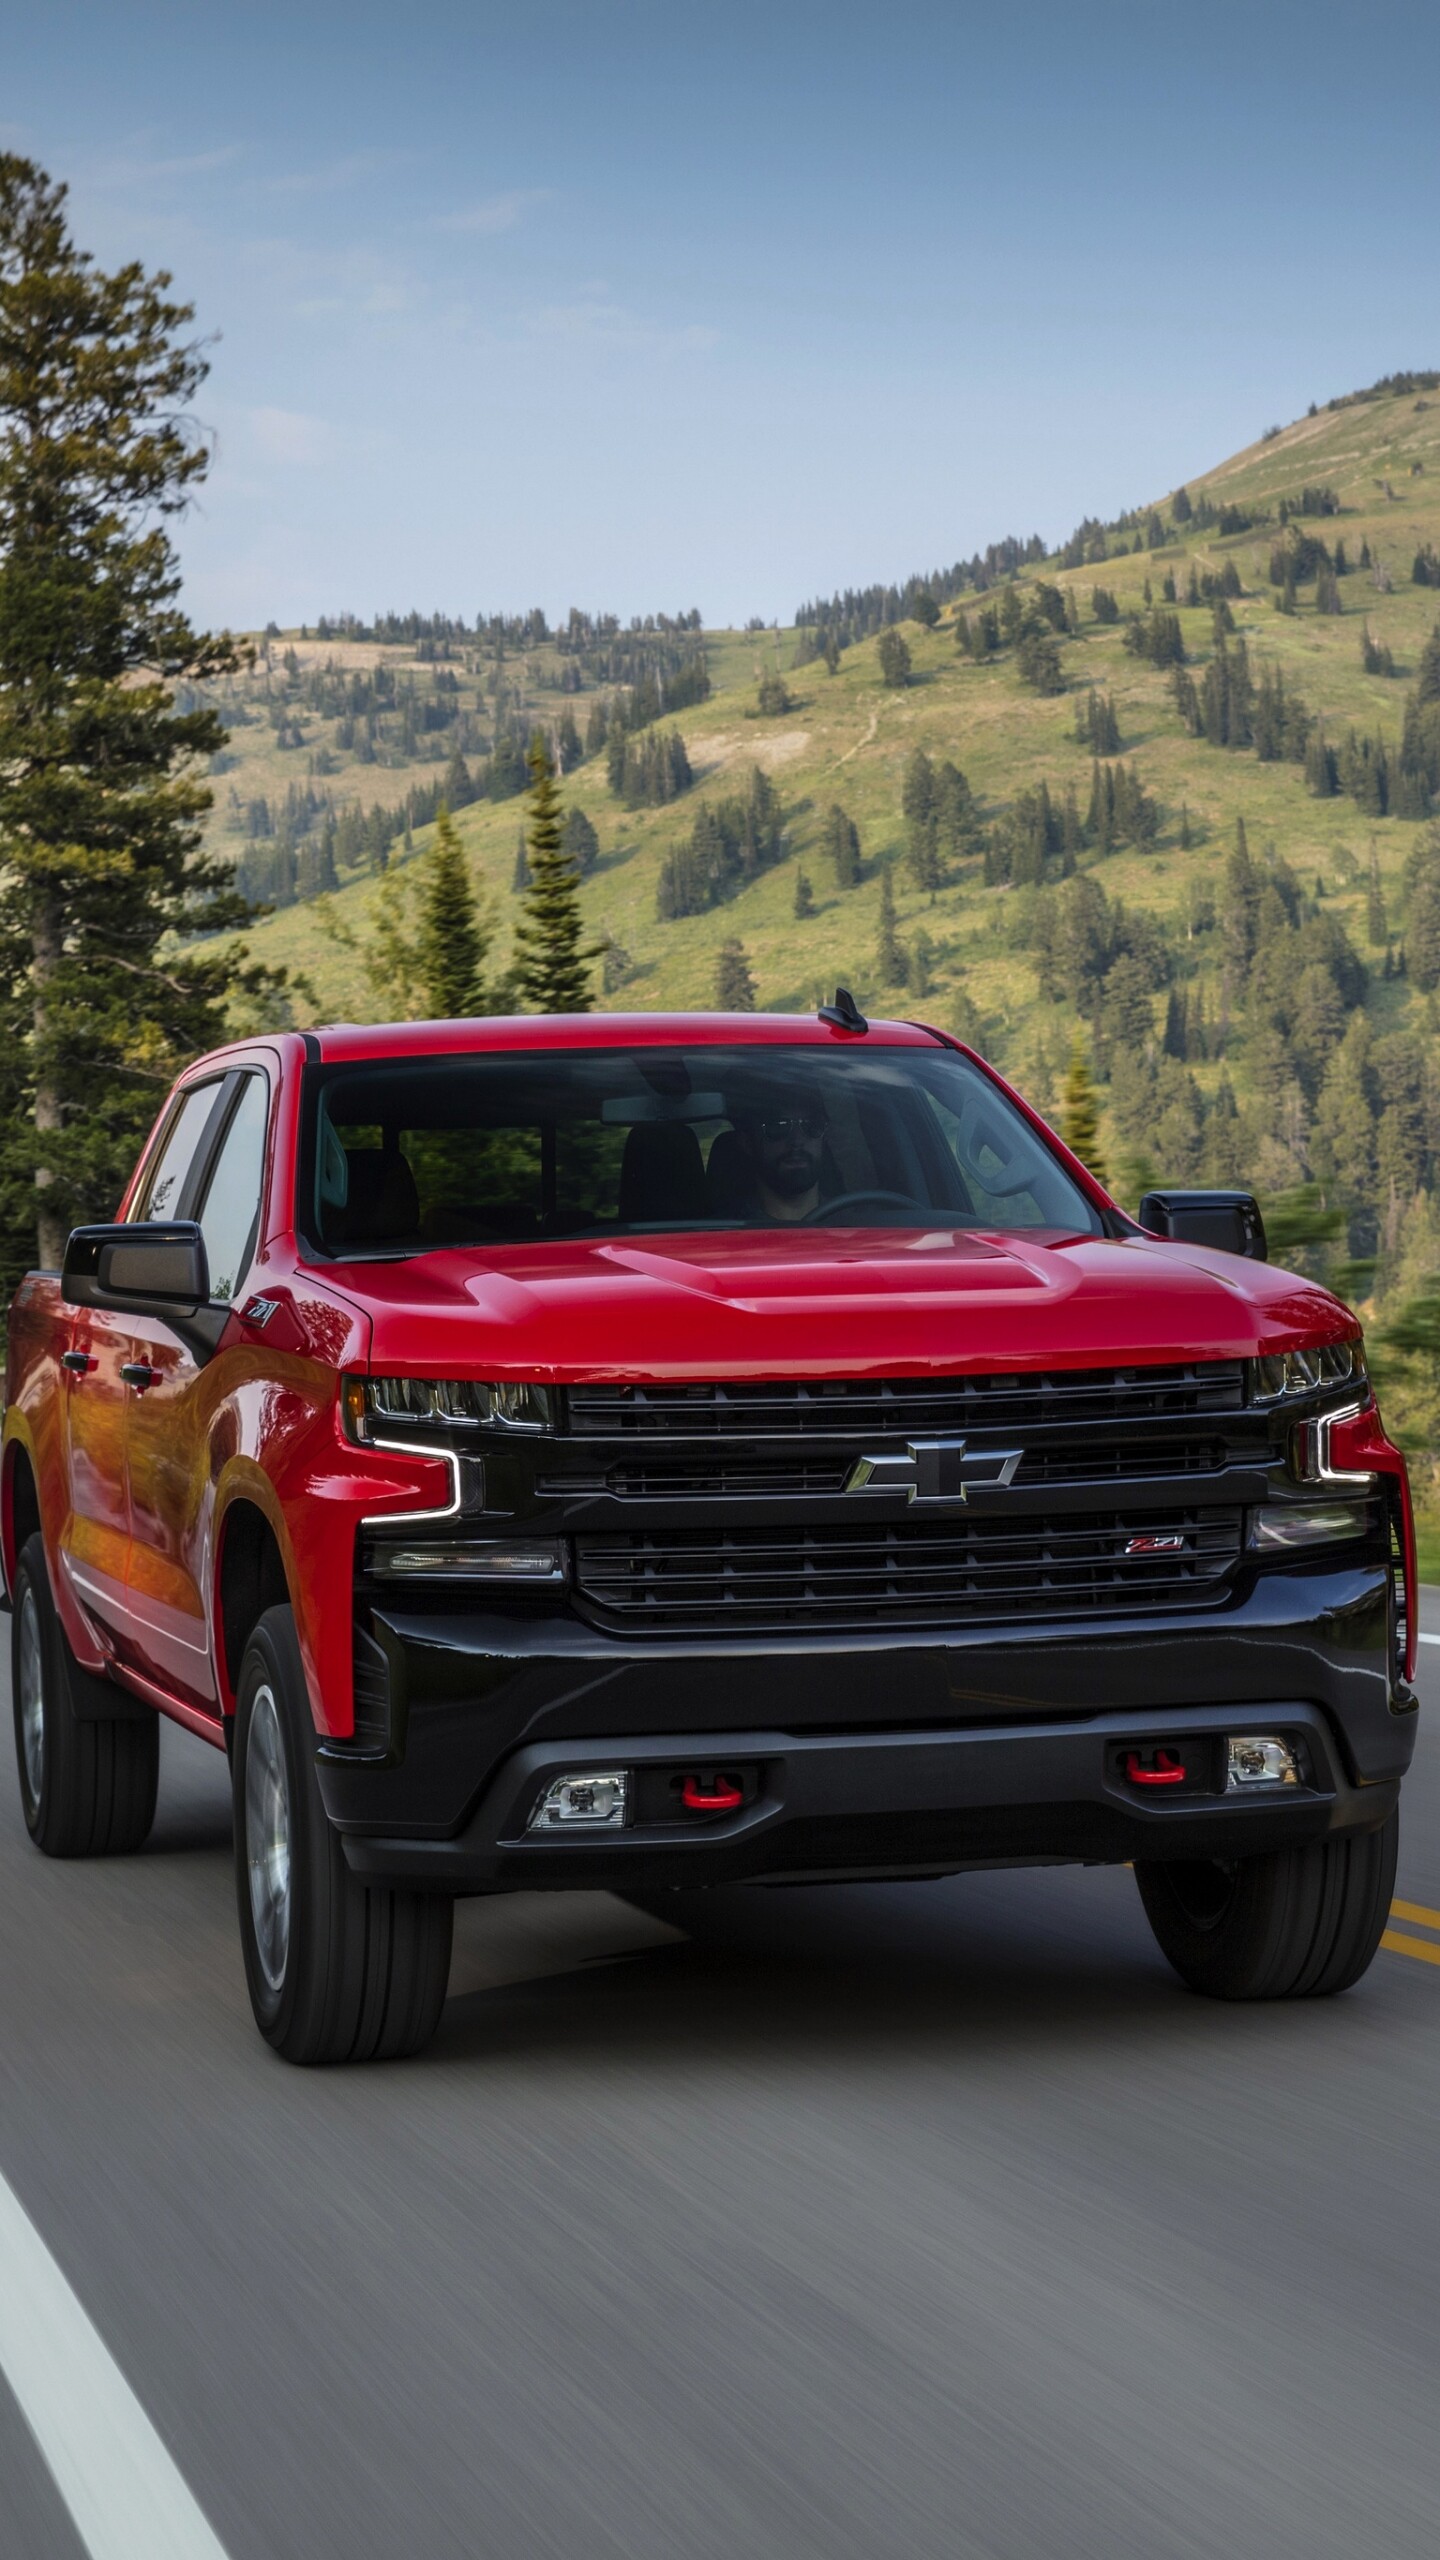 Chevrolet Silverado: Z71 package, An optional upgrade enhancing the pickup's off-road capabilities. 1440x2560 HD Wallpaper.